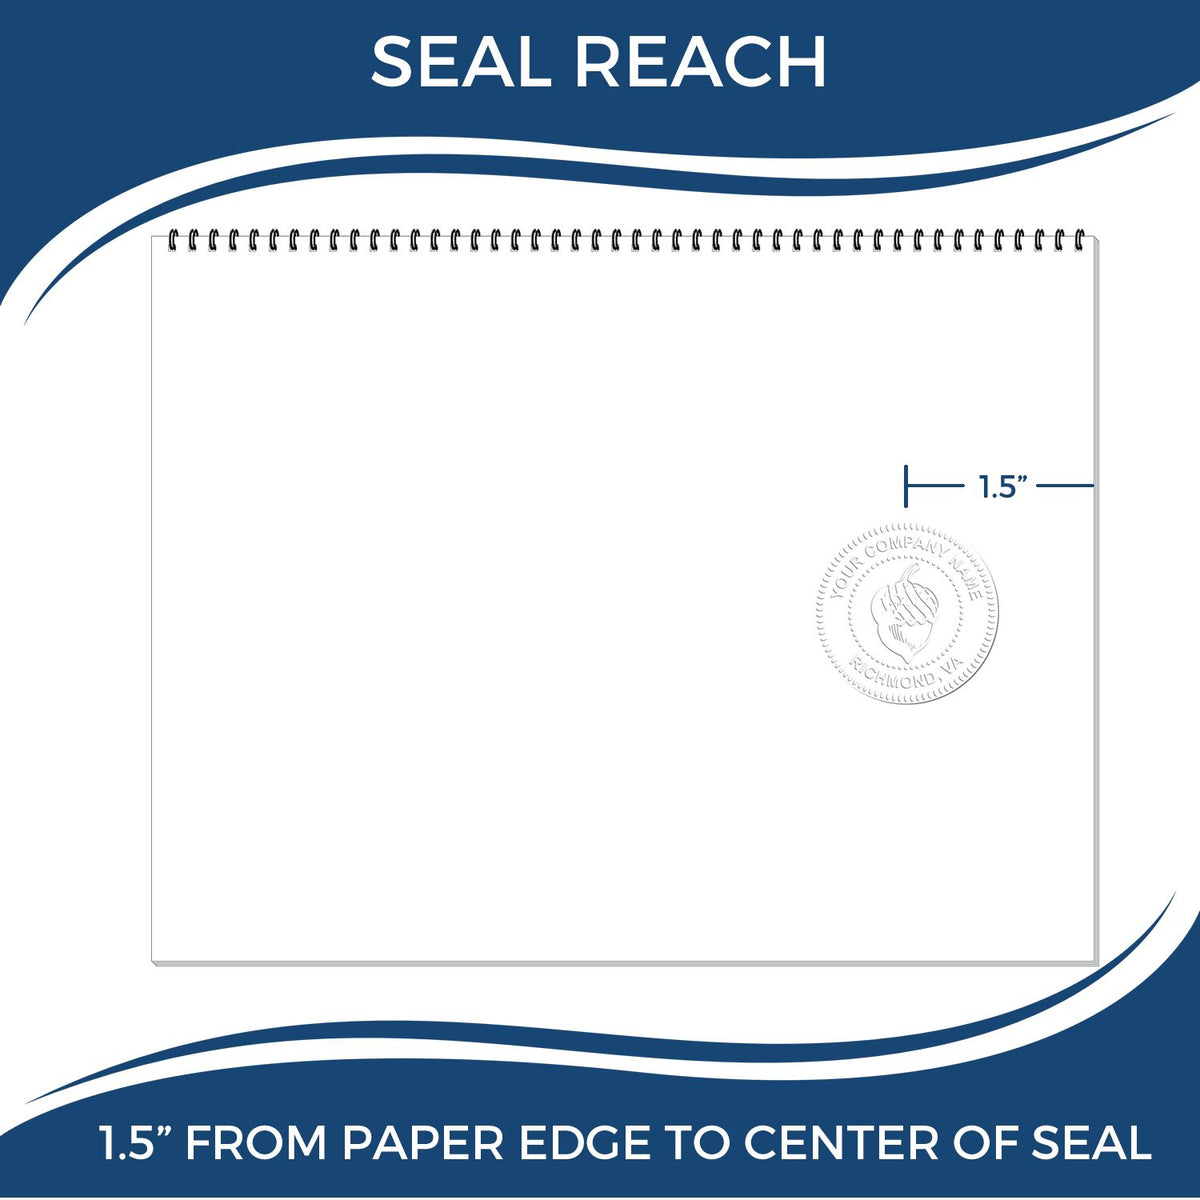 An infographic showing the seal reach which is represented by a ruler and a miniature seal image of the Gift Kansas Engineer Seal